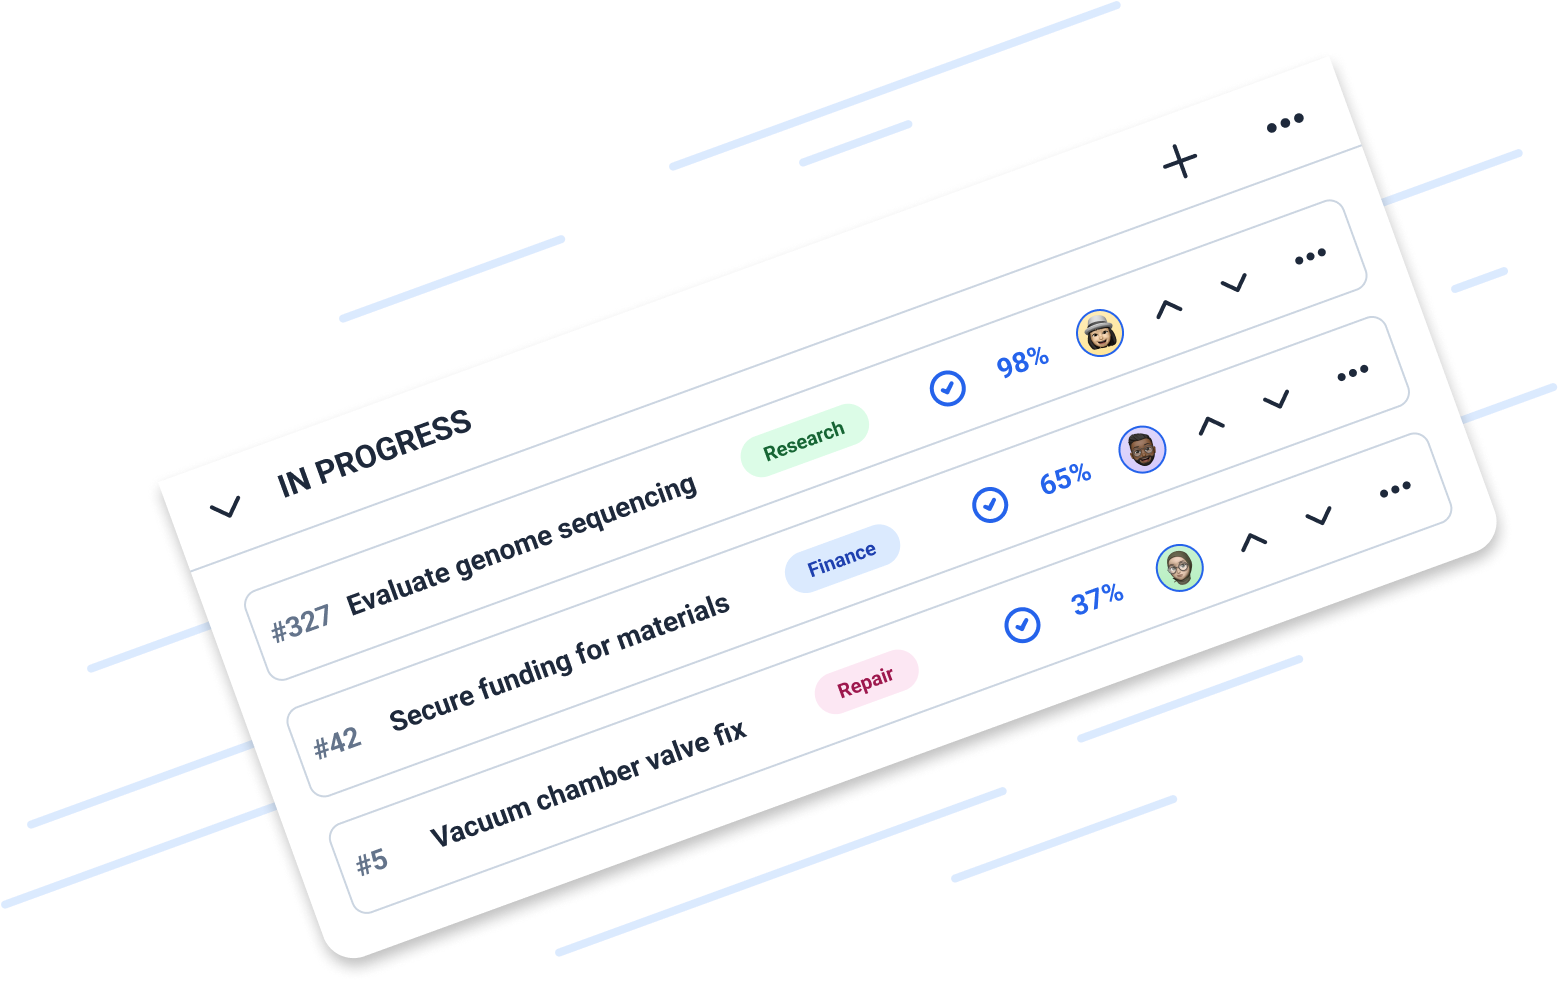 An illustration showing the look and feel of tasks in Projectify's user interface